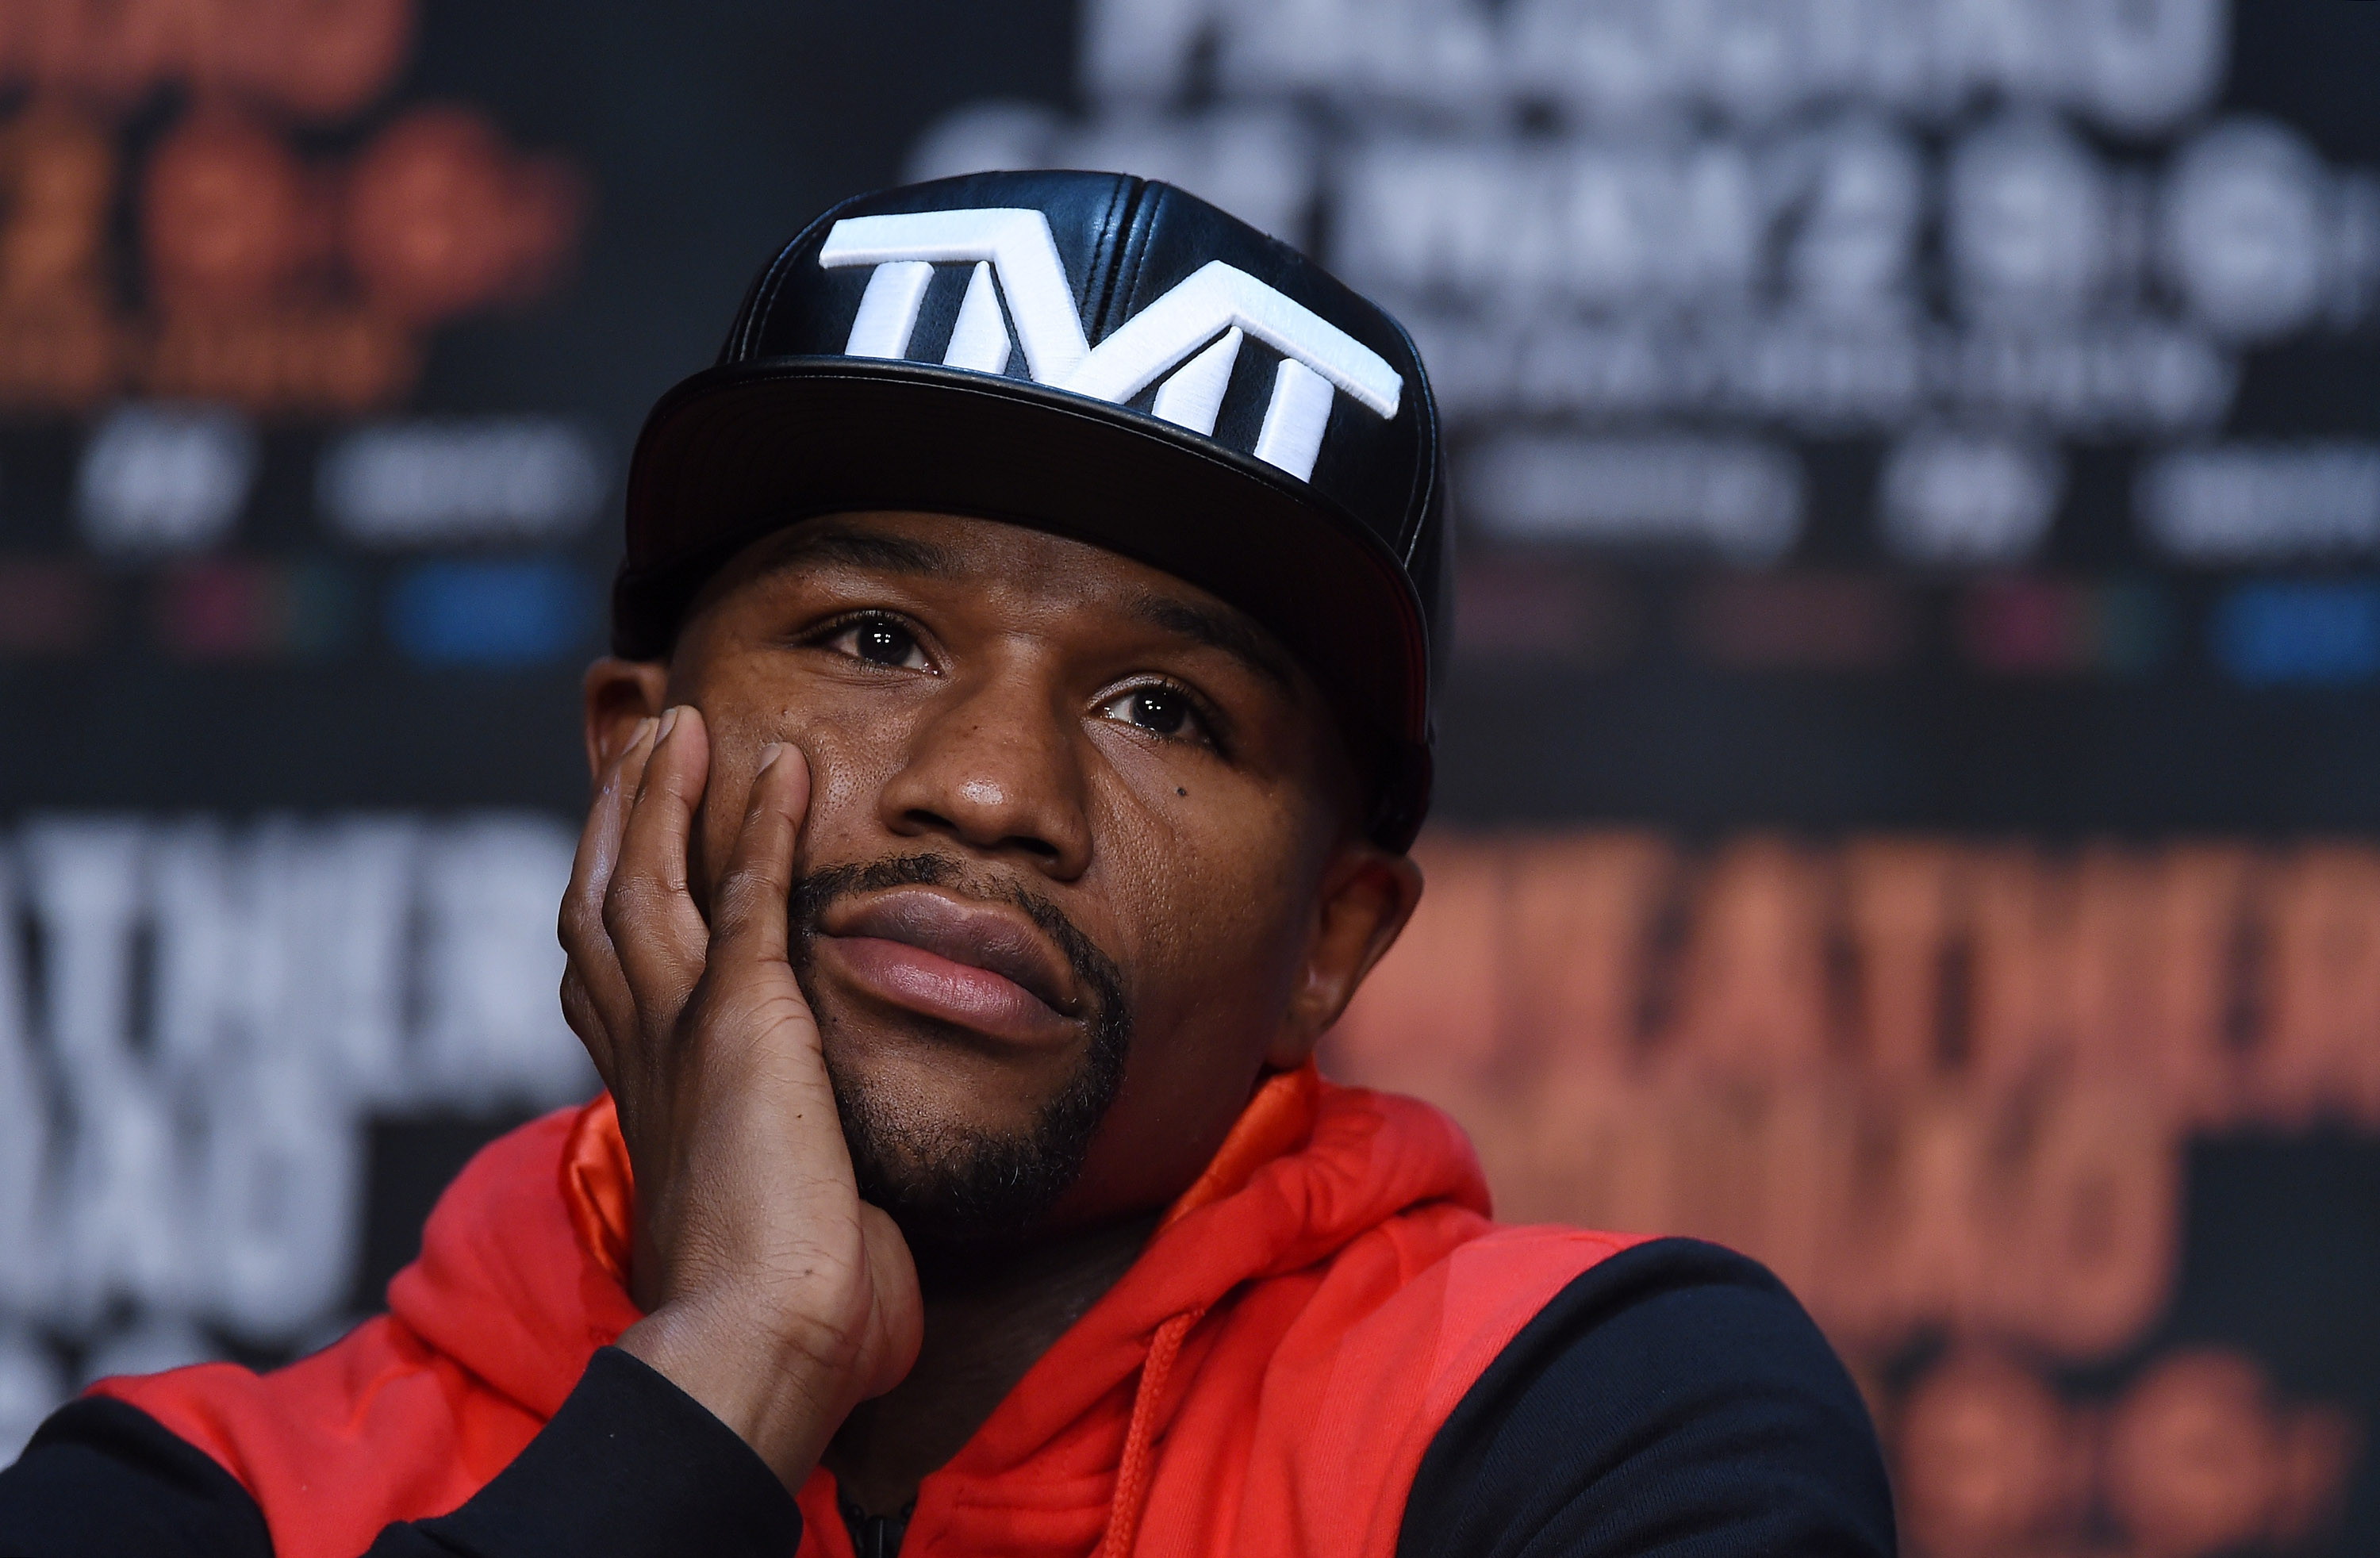 Floyd Mayweather’s Team Member Hits Fan Who Asked For Photo: Report